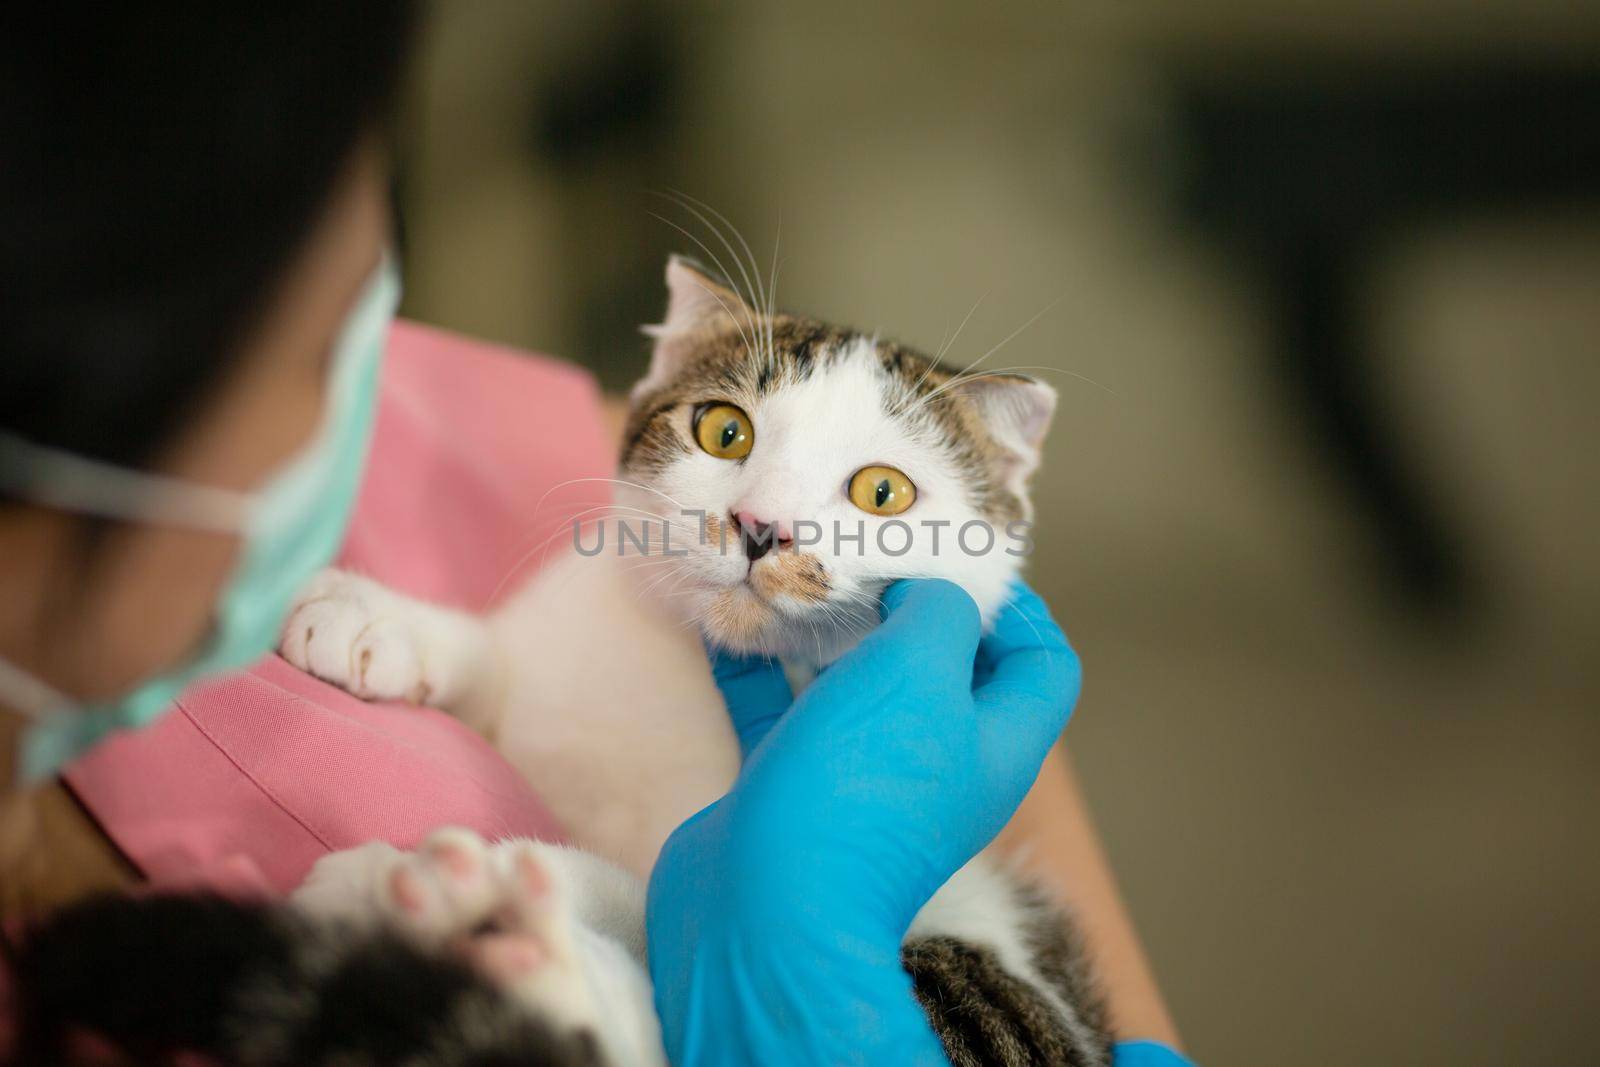 Doctor with pink suit holding cat on her arms at animal hospital